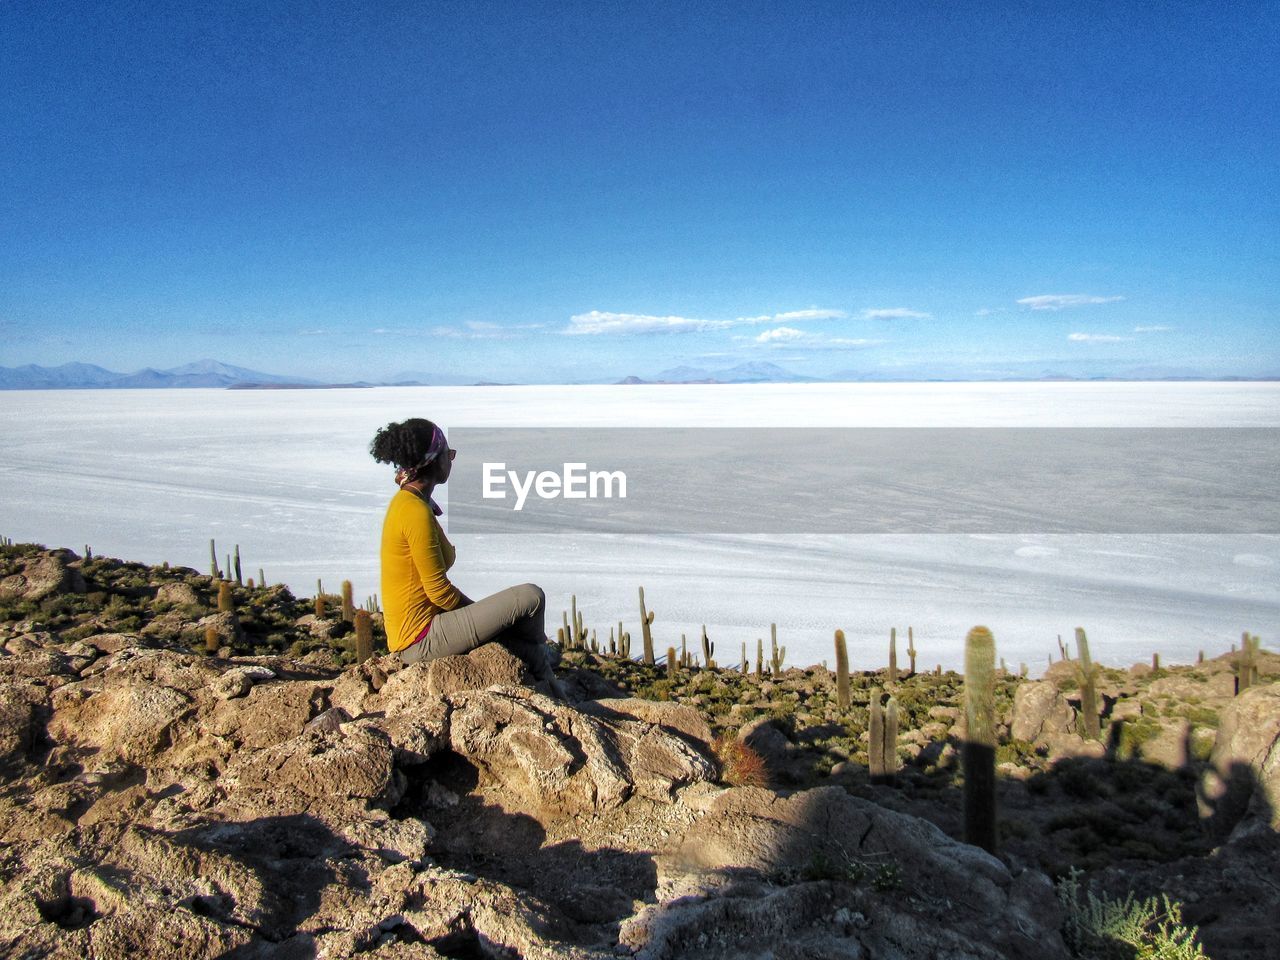 Woman sitting on rock looking at a salt flat against a blue sky